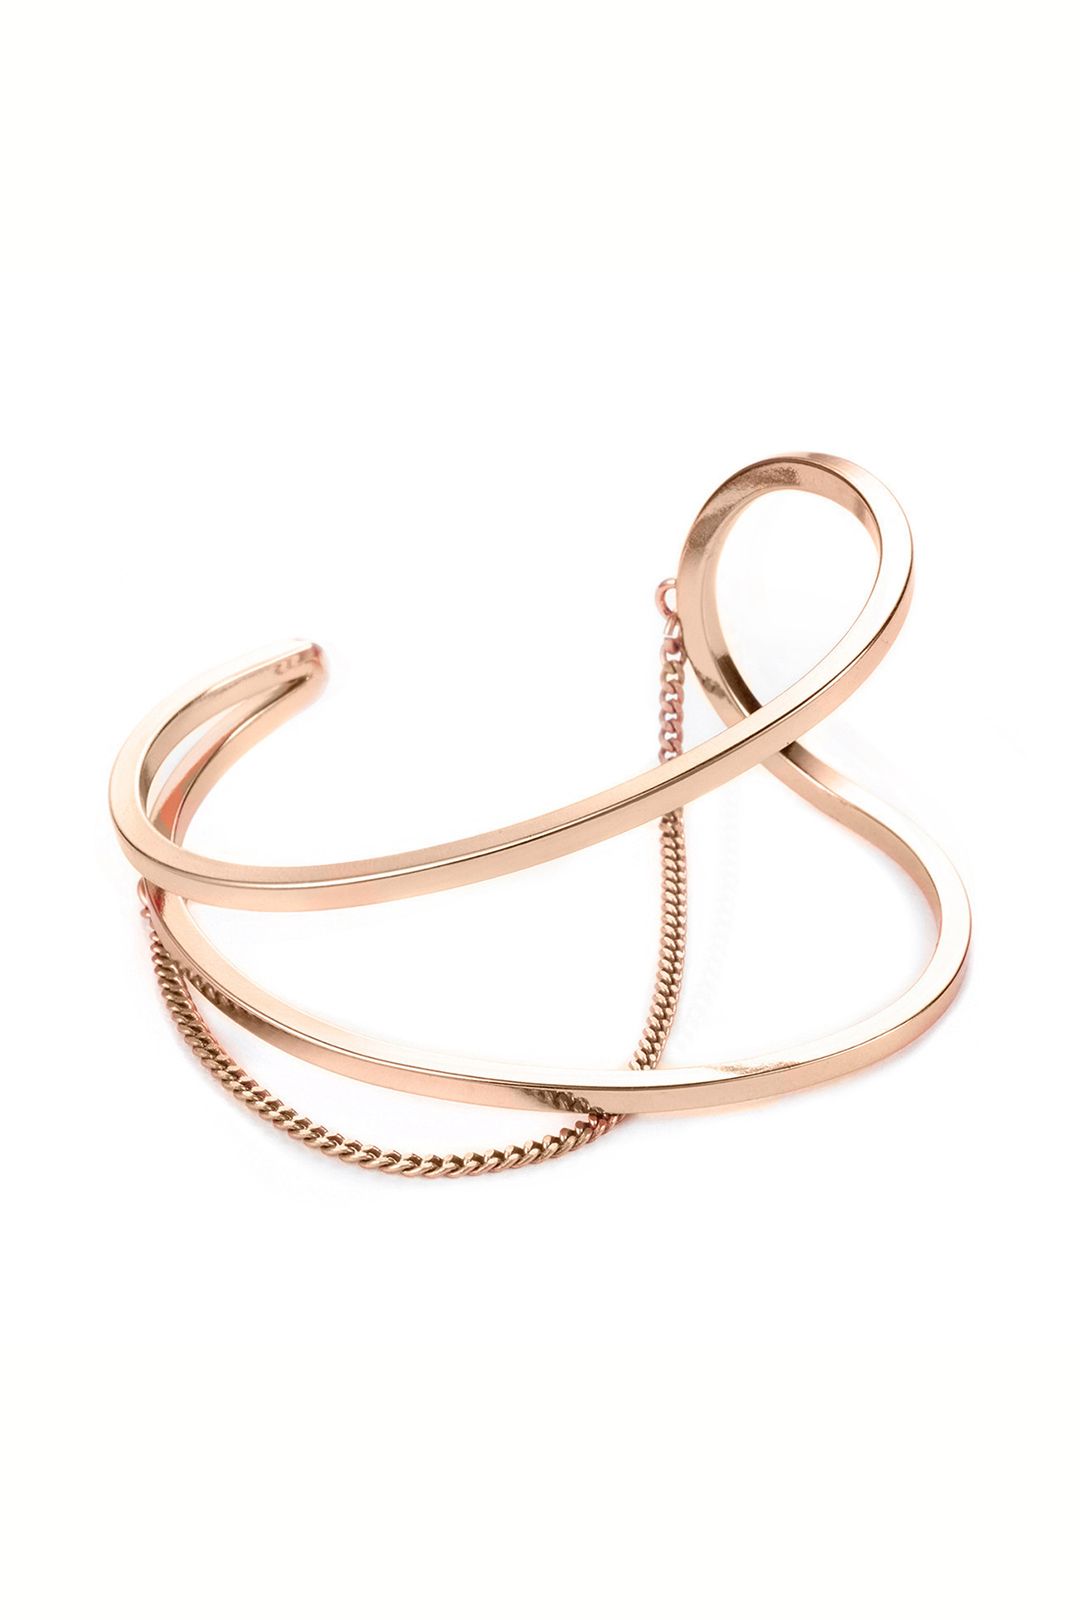 Jenny Bird - River Cuff - Rose Gold - Front